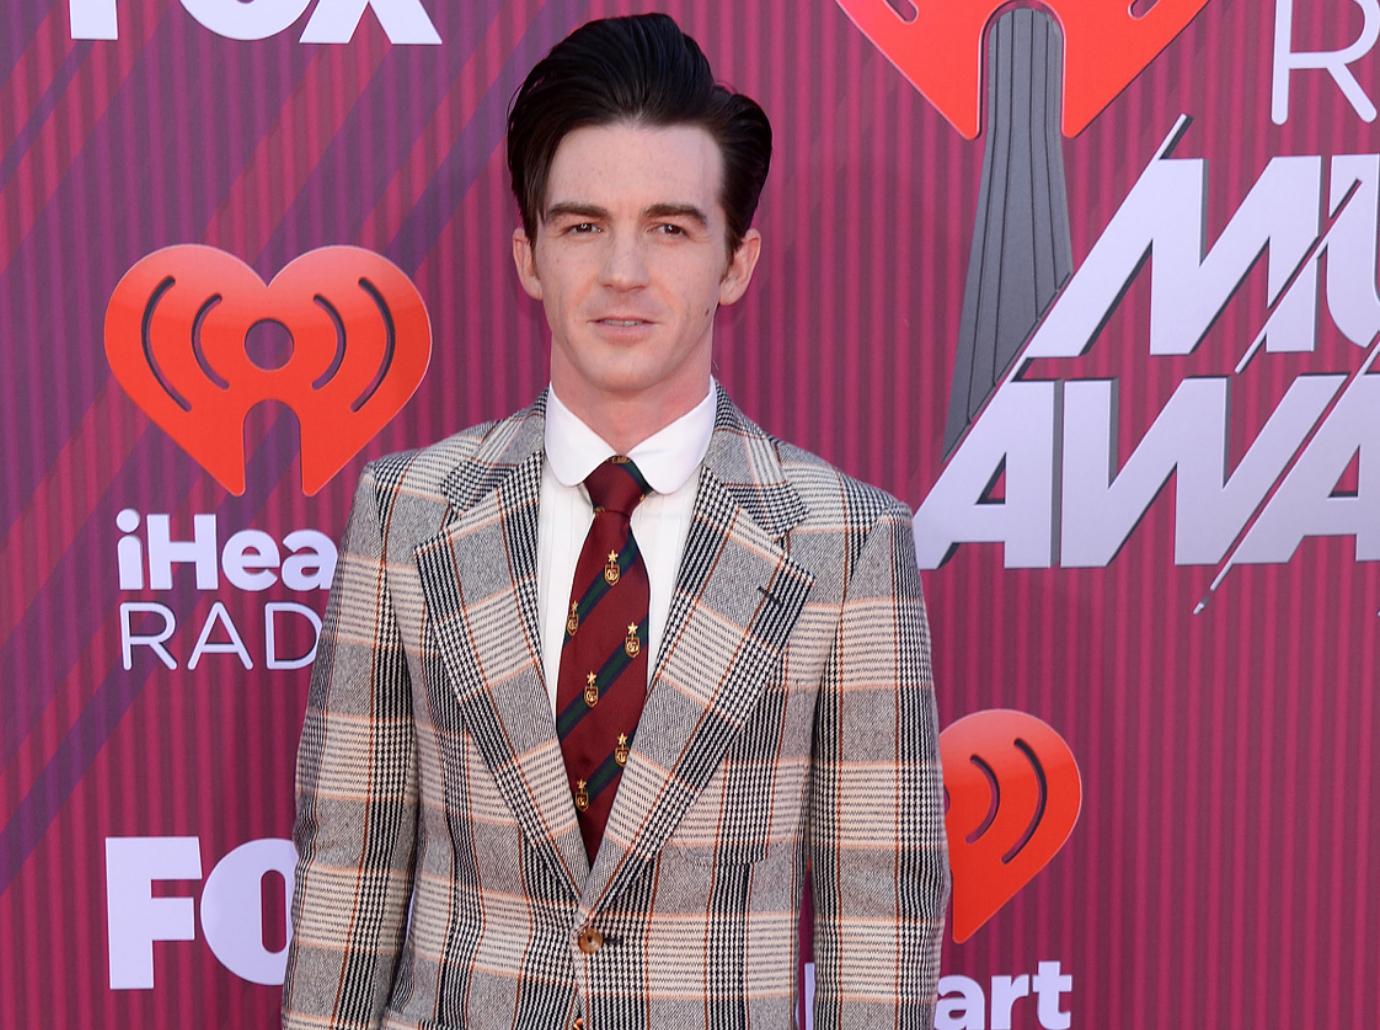 Drake Bell Reveals Hes Leaving The Country After Child Endangerment Arrest